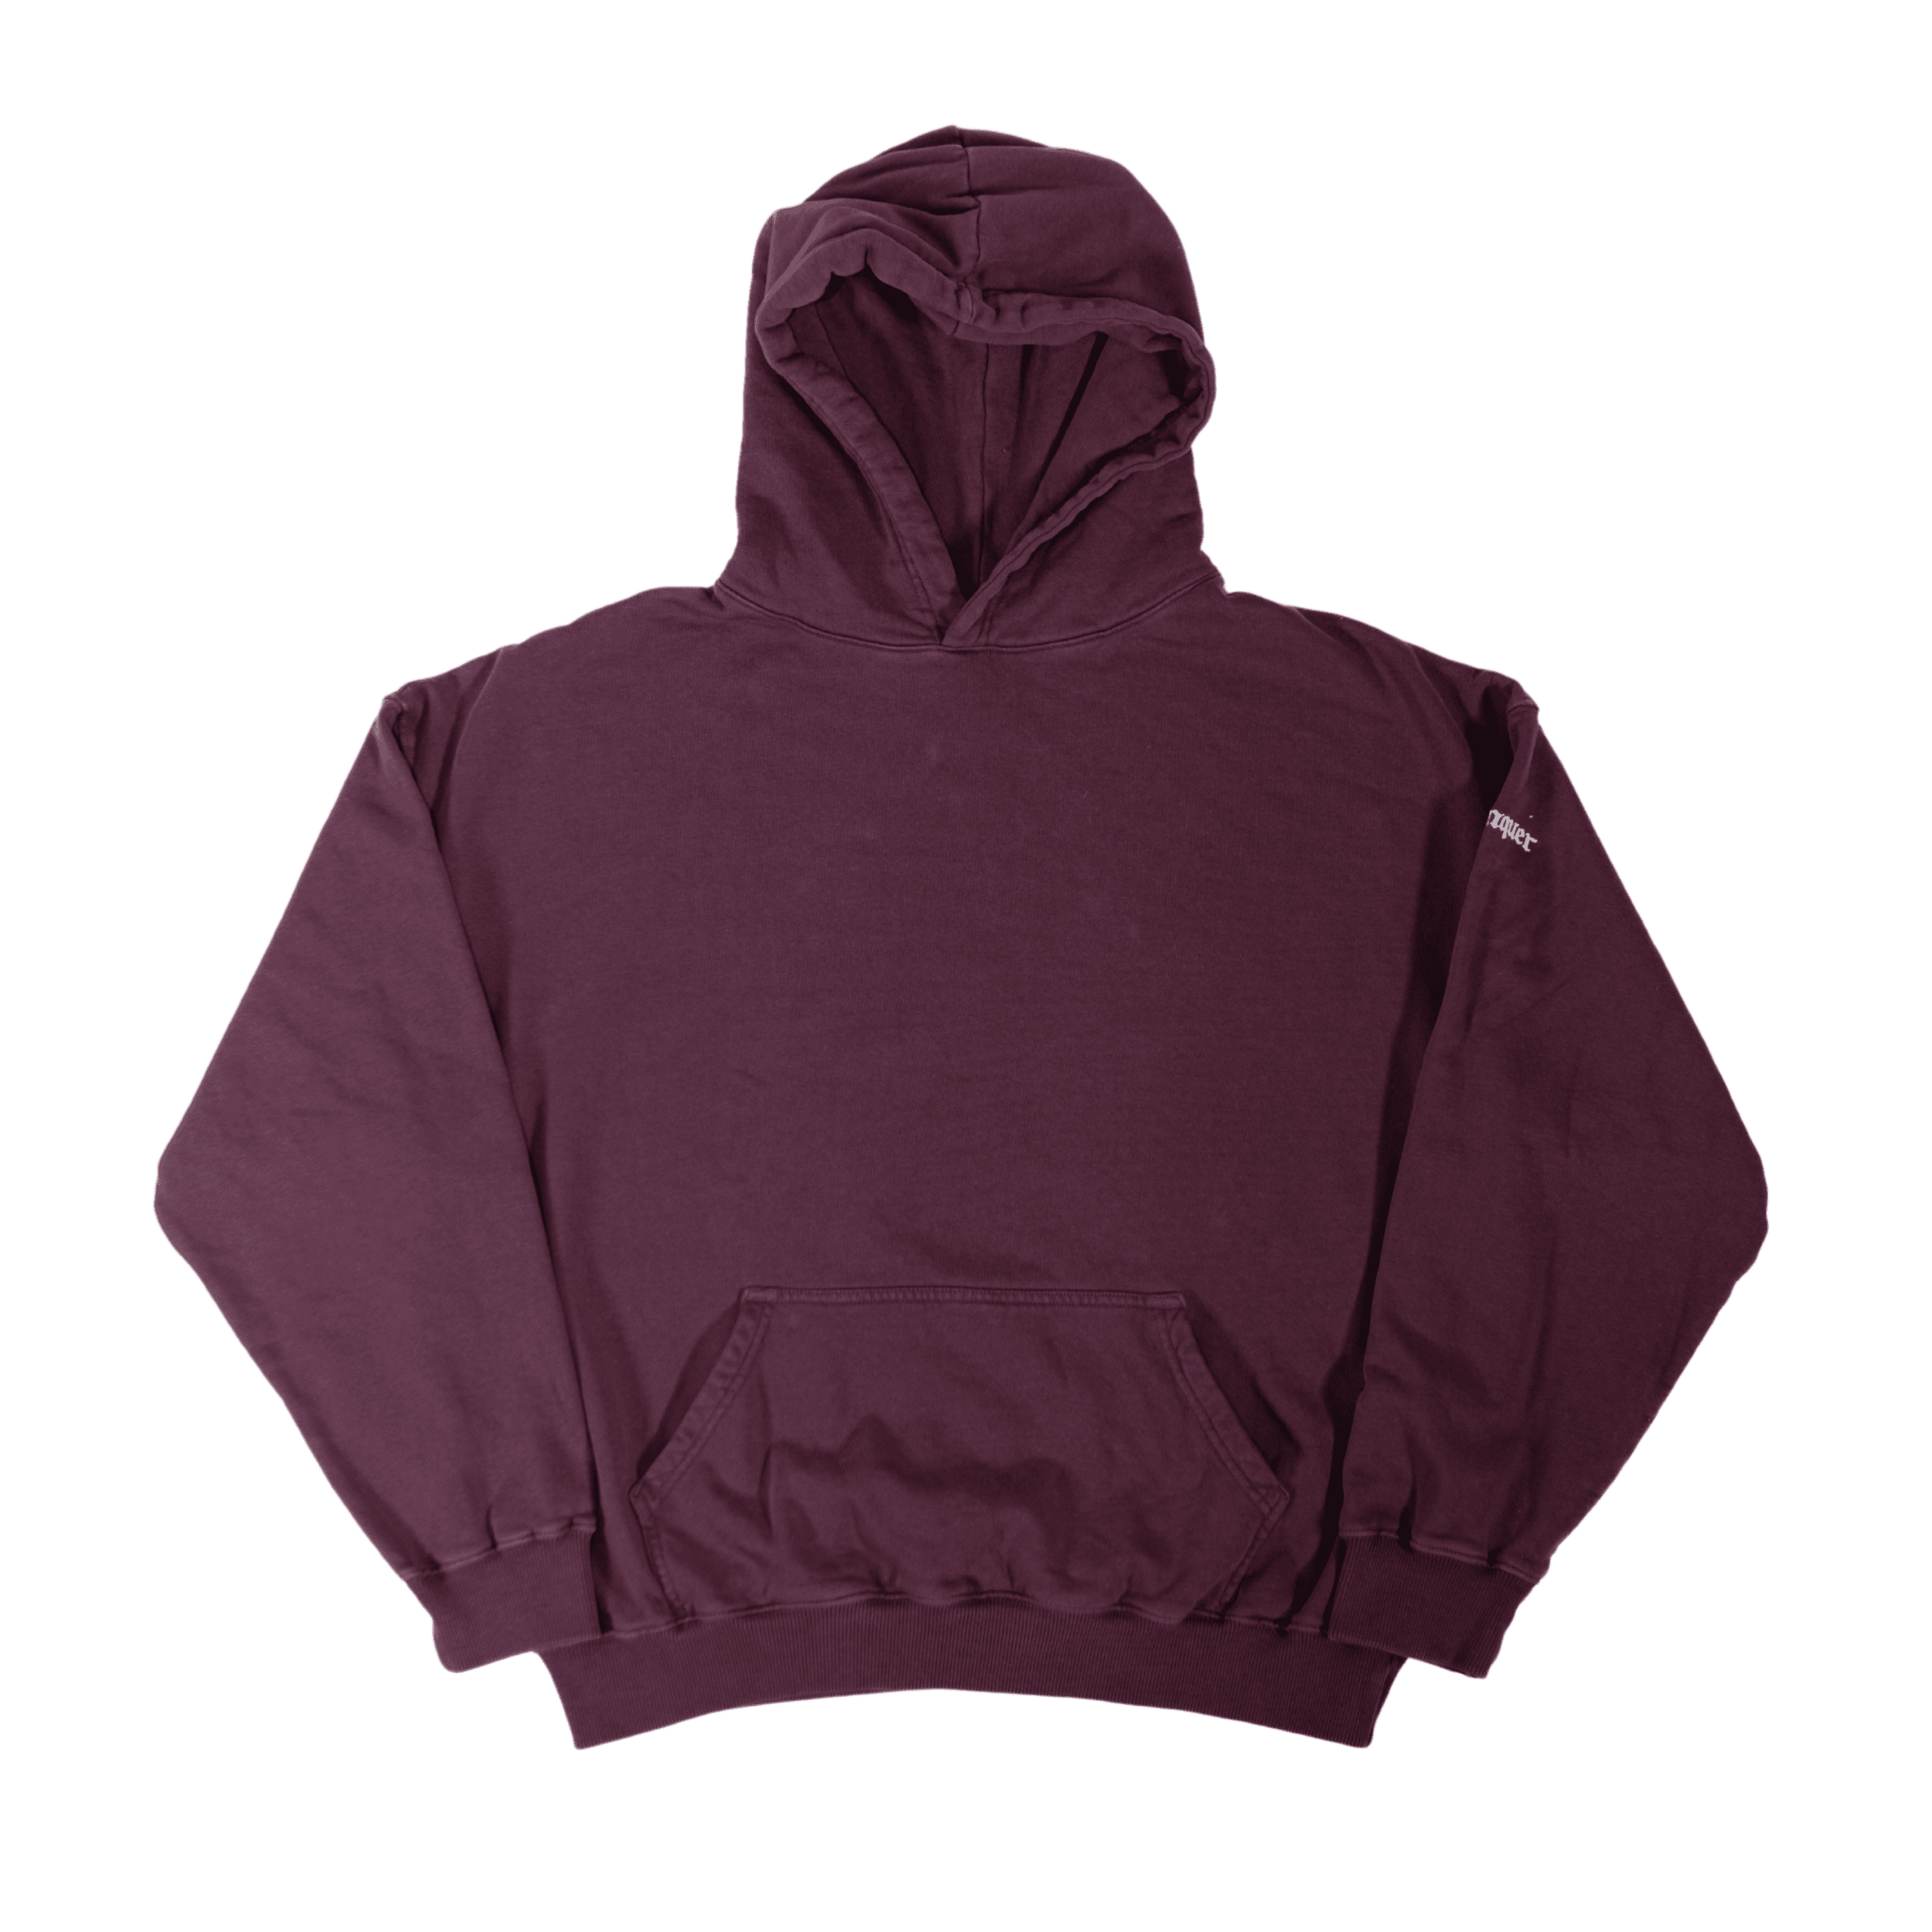 Sovereign Conquer Hoodie Blank Burgundy oversized sustainable hoodie, photoshoot